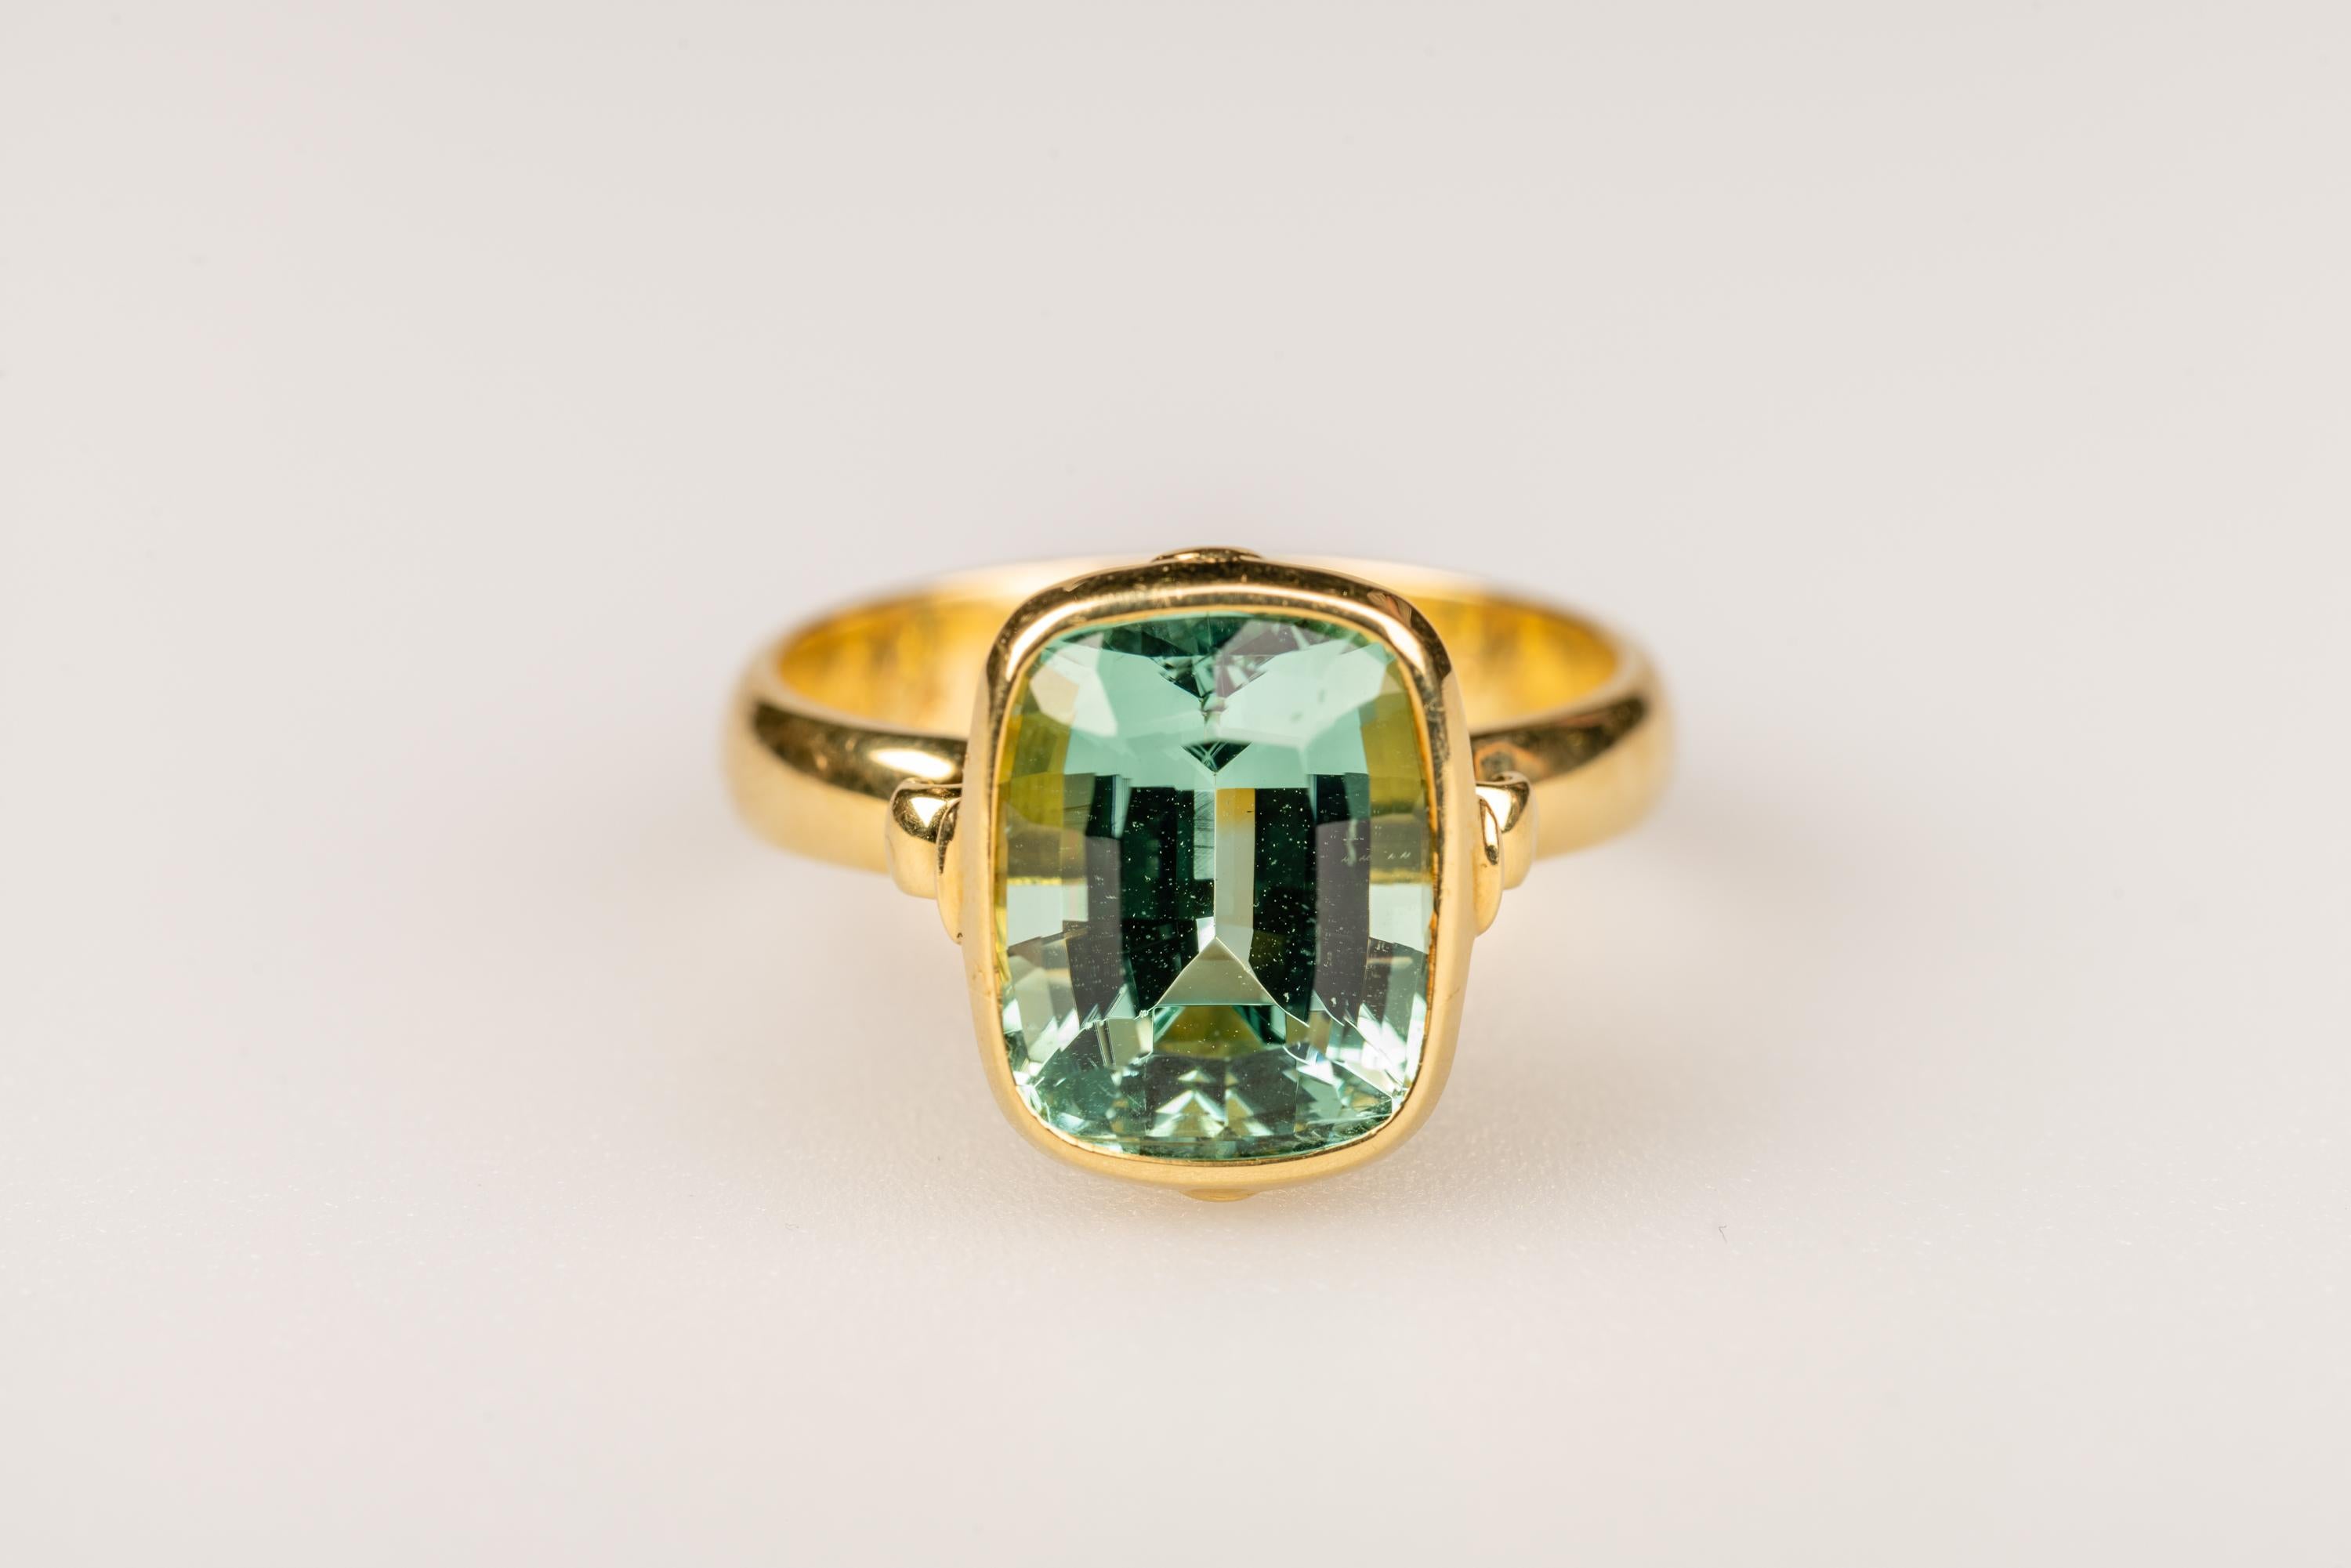 An 18k yellow gold ring bezel set with a custion cut  5.32 carat mint green tourmaline, ring size 7. This ring was designed and made by llyn strong.